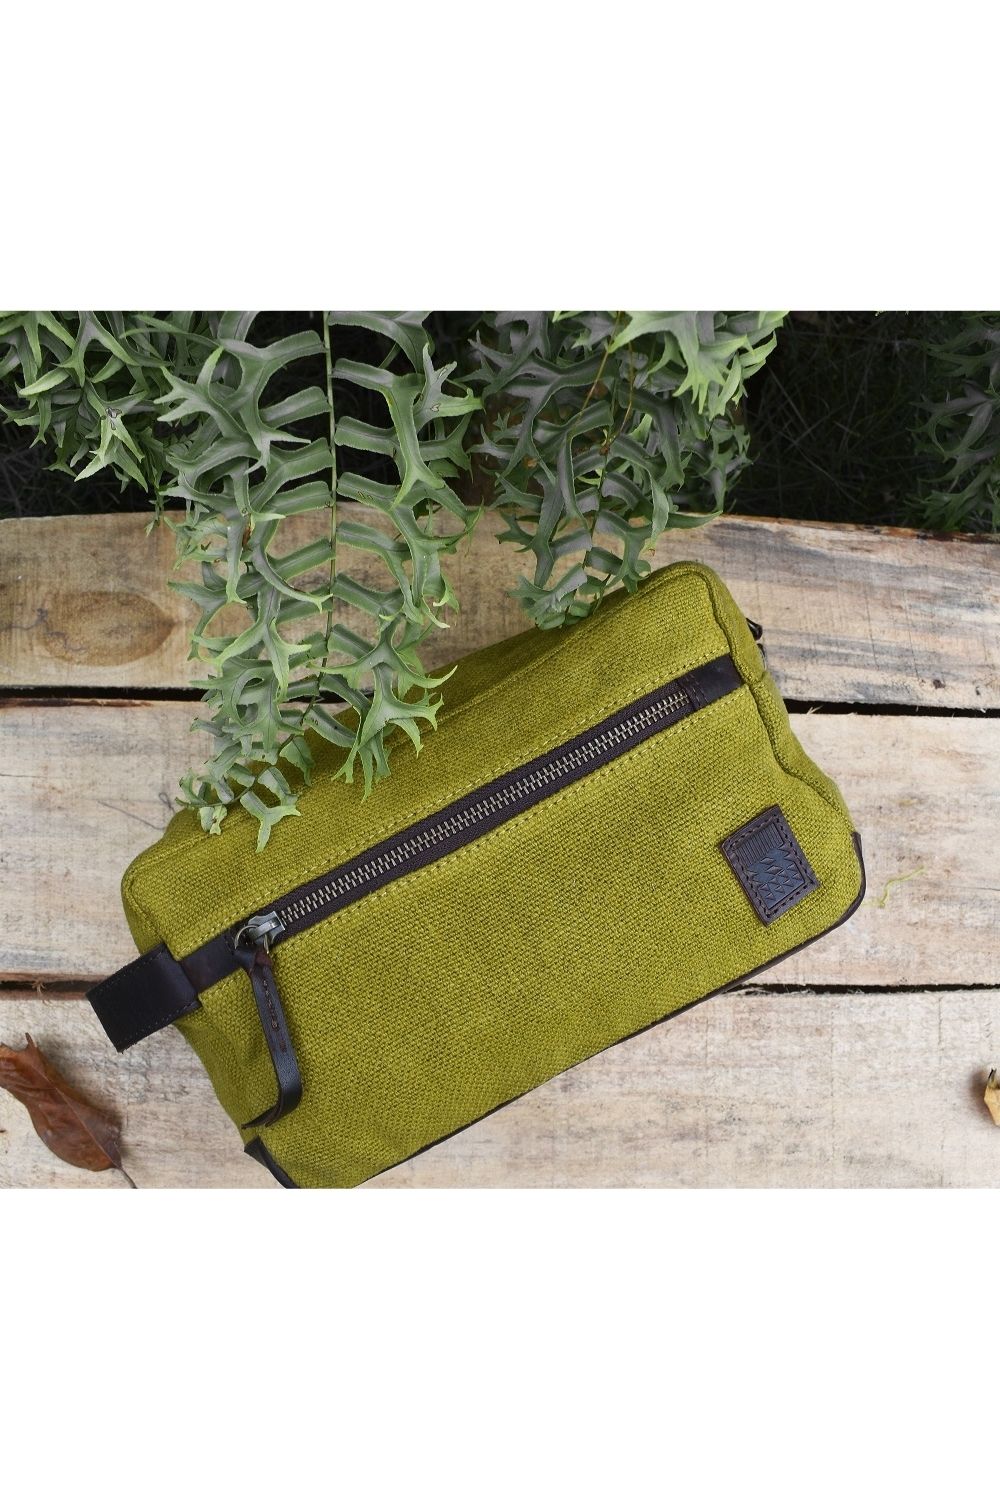 The Burlap Toiletries Pouch Apparel & Accessories The Burlap People Olive 